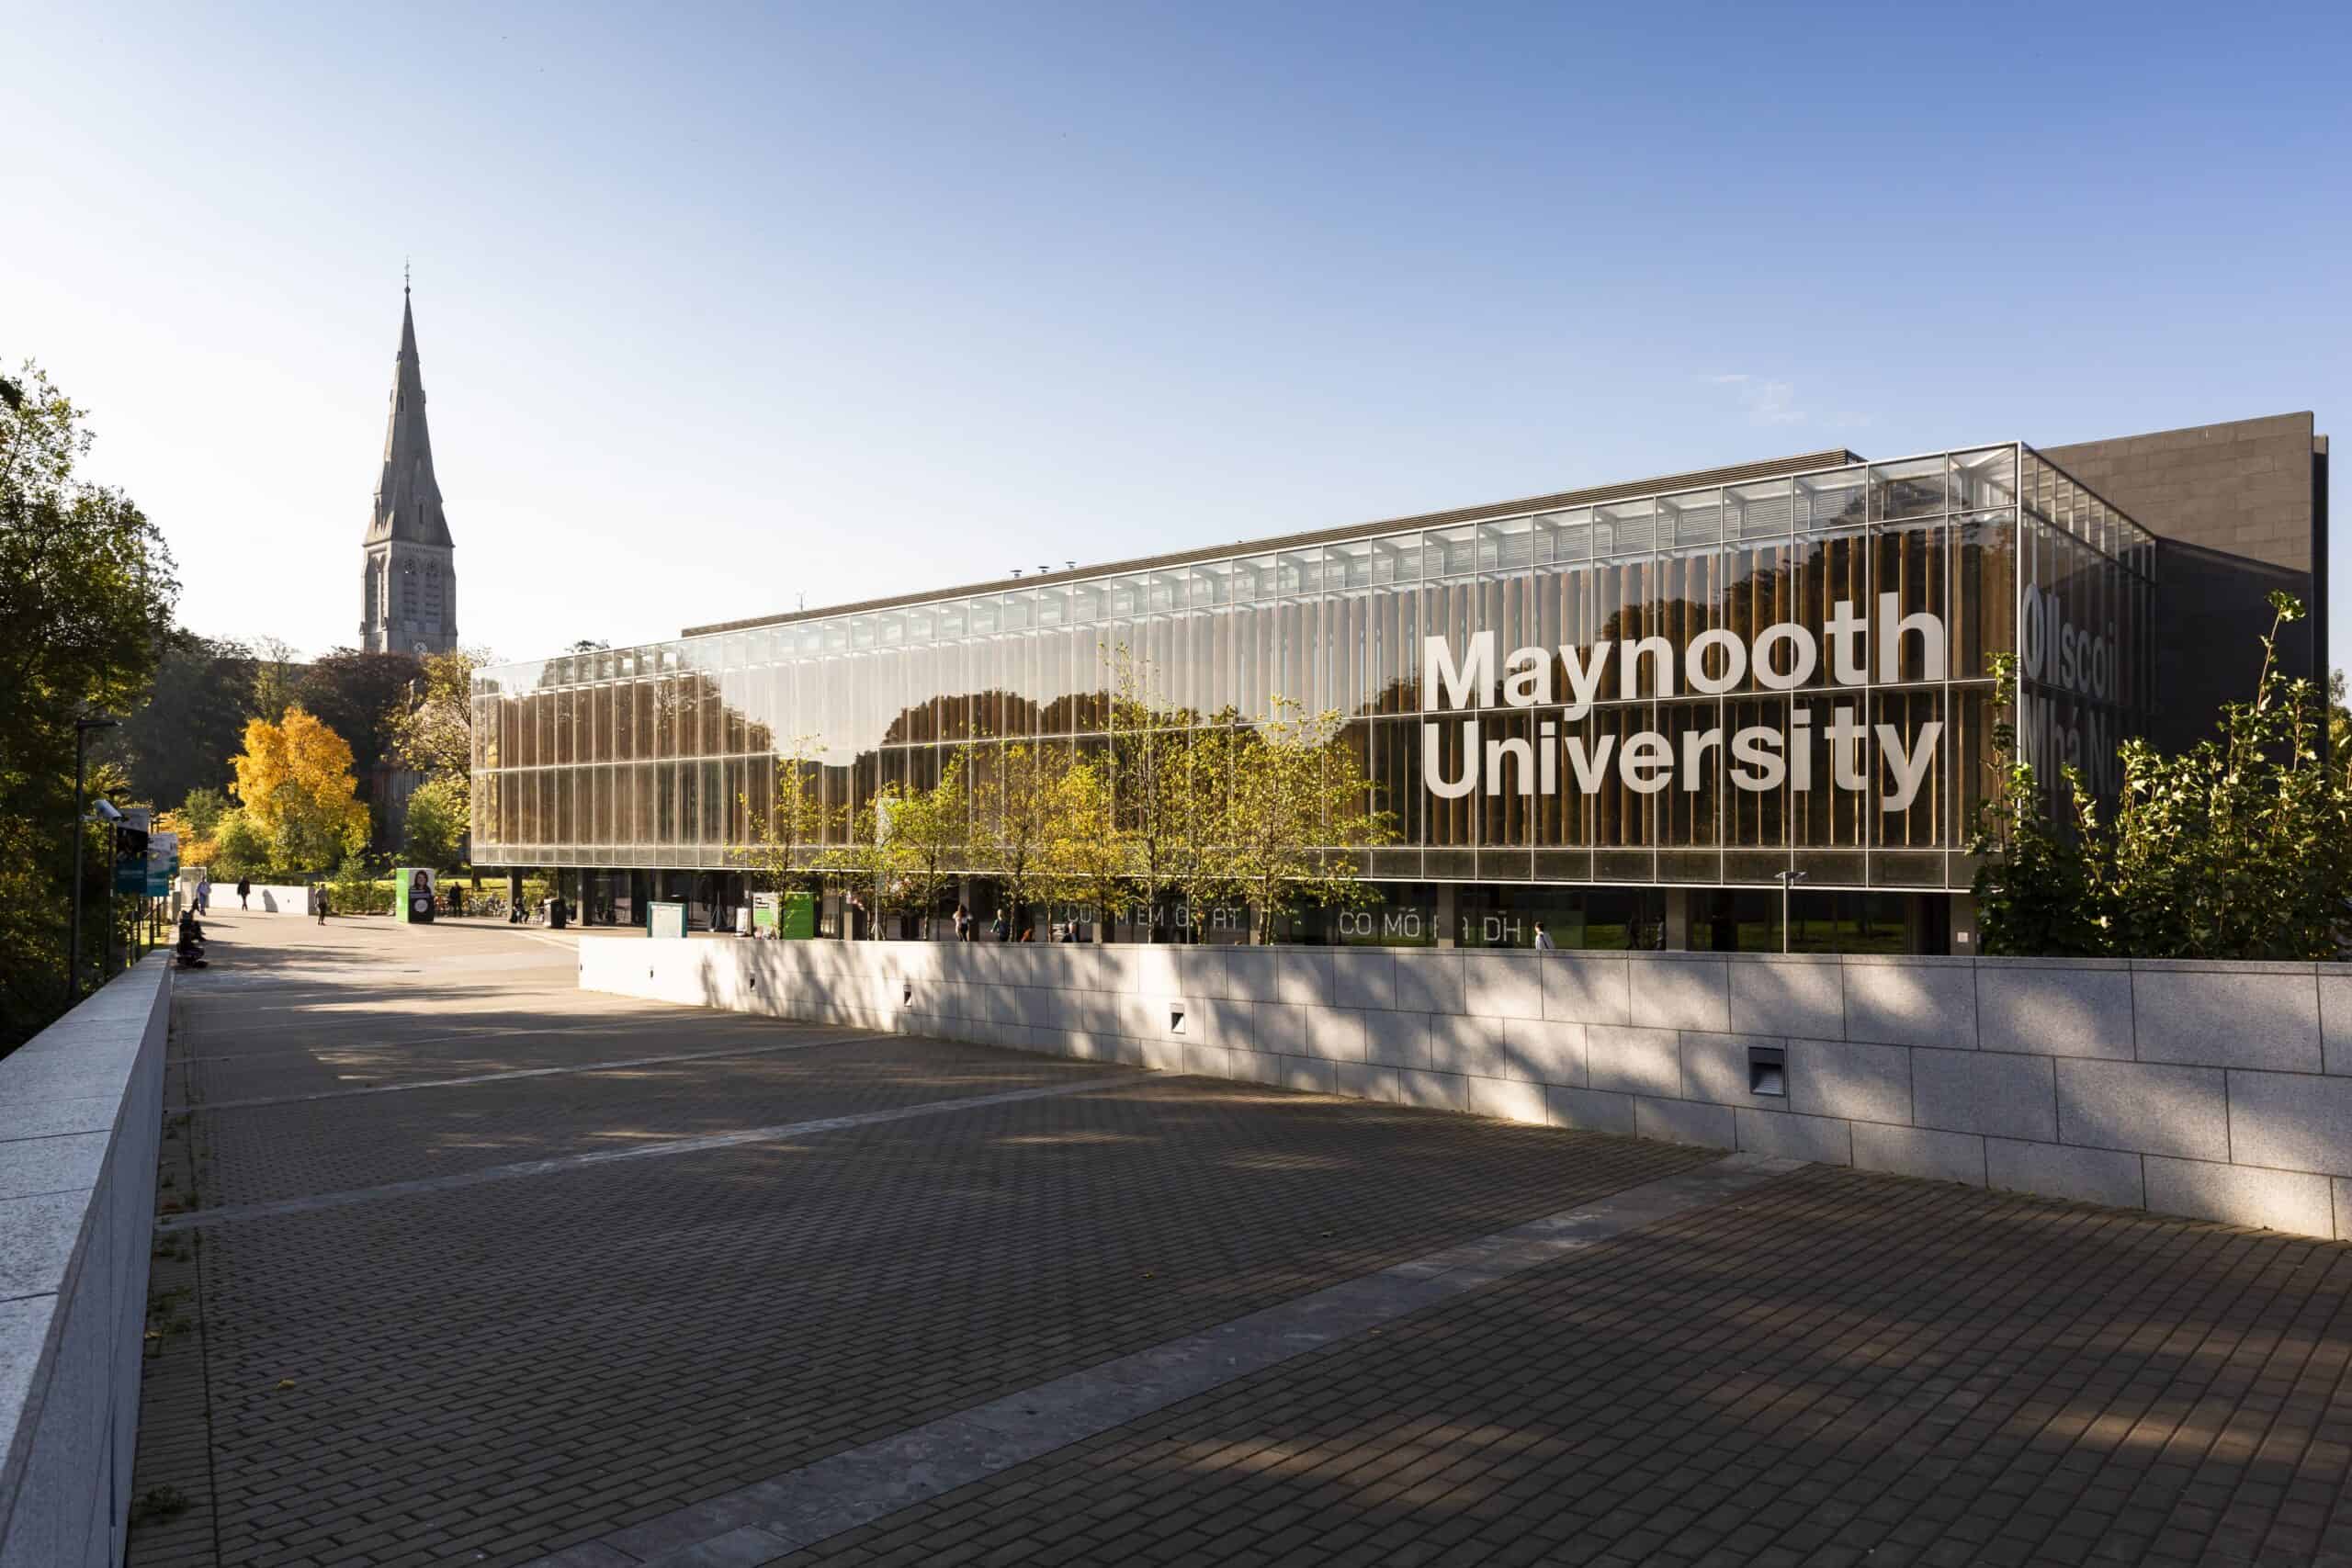 A photo of Maynooth University's campus.